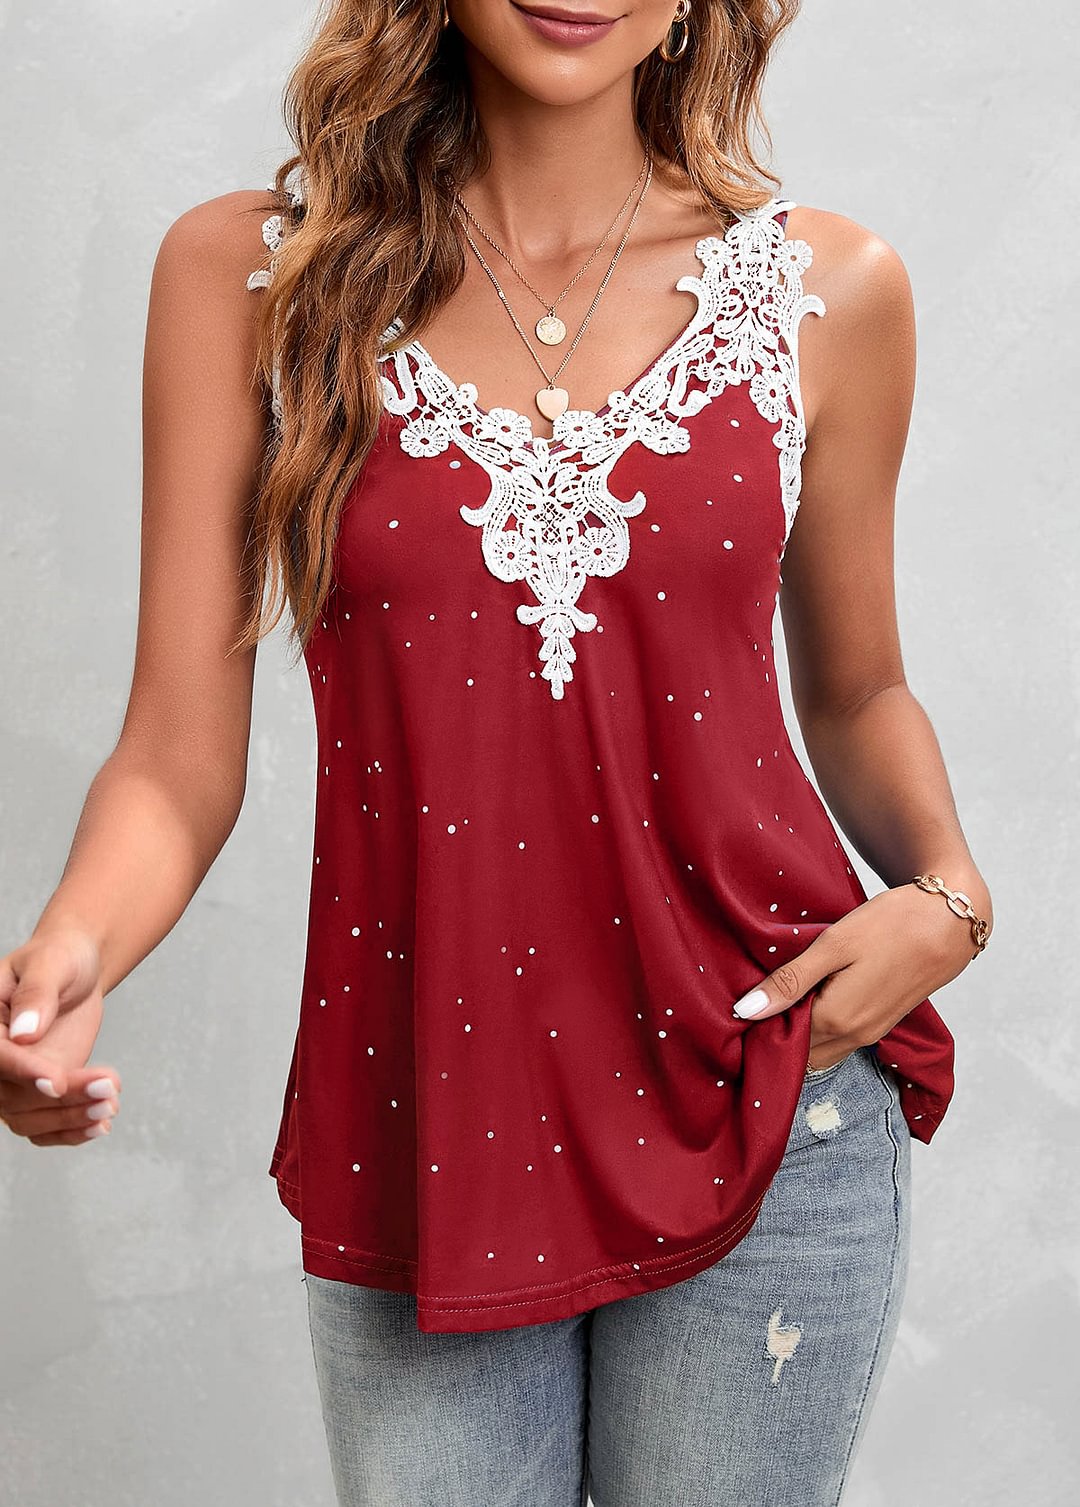 Red Lace Stitching Polka Dot Tank Top